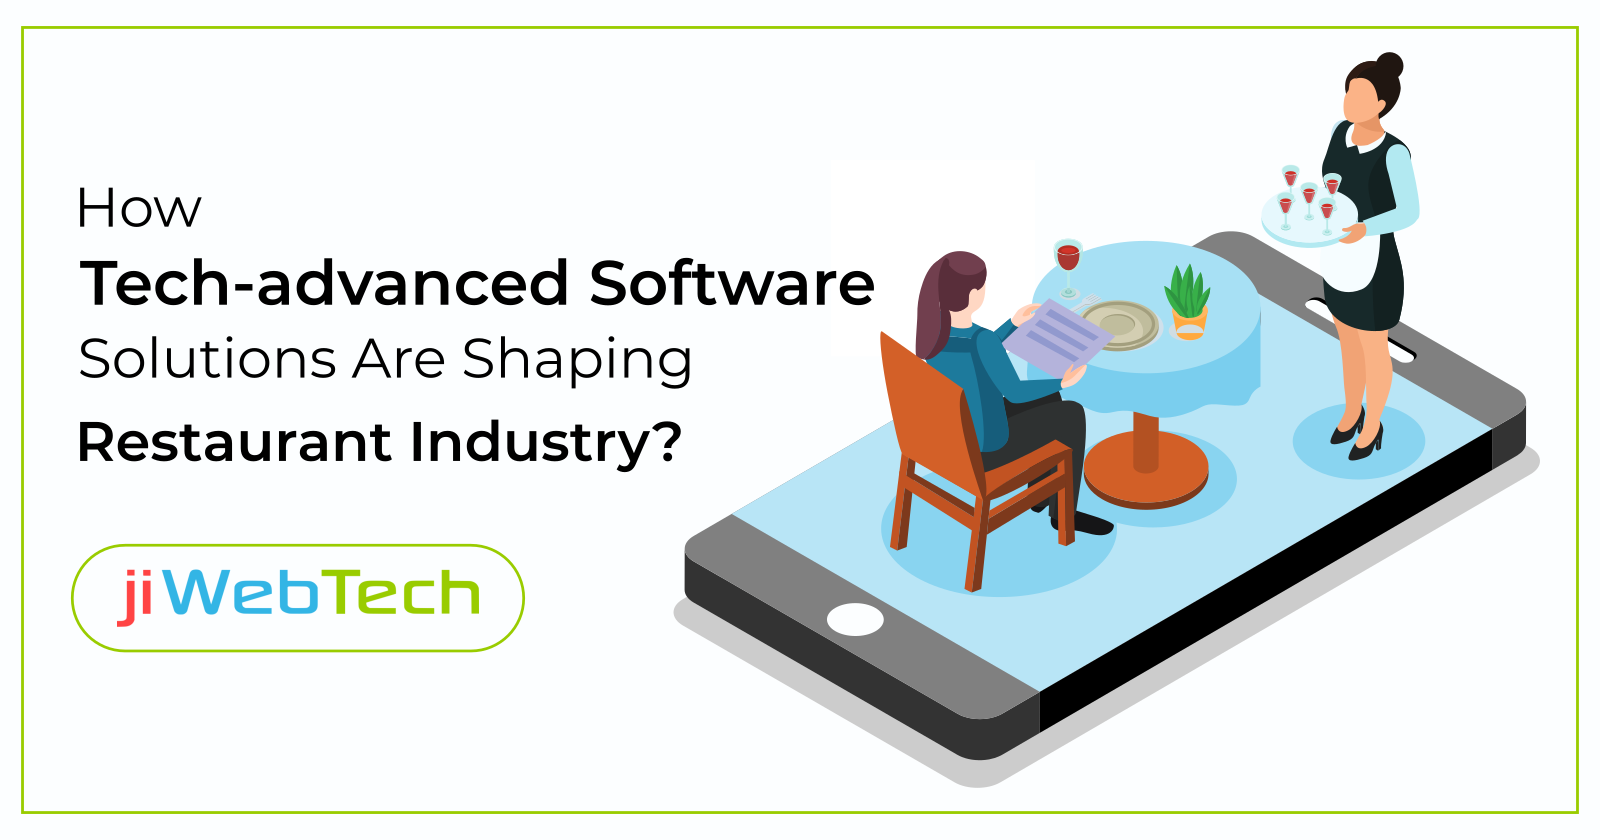 How Tech-advanced Software Solutions Are Shaping Restaurant Industry?